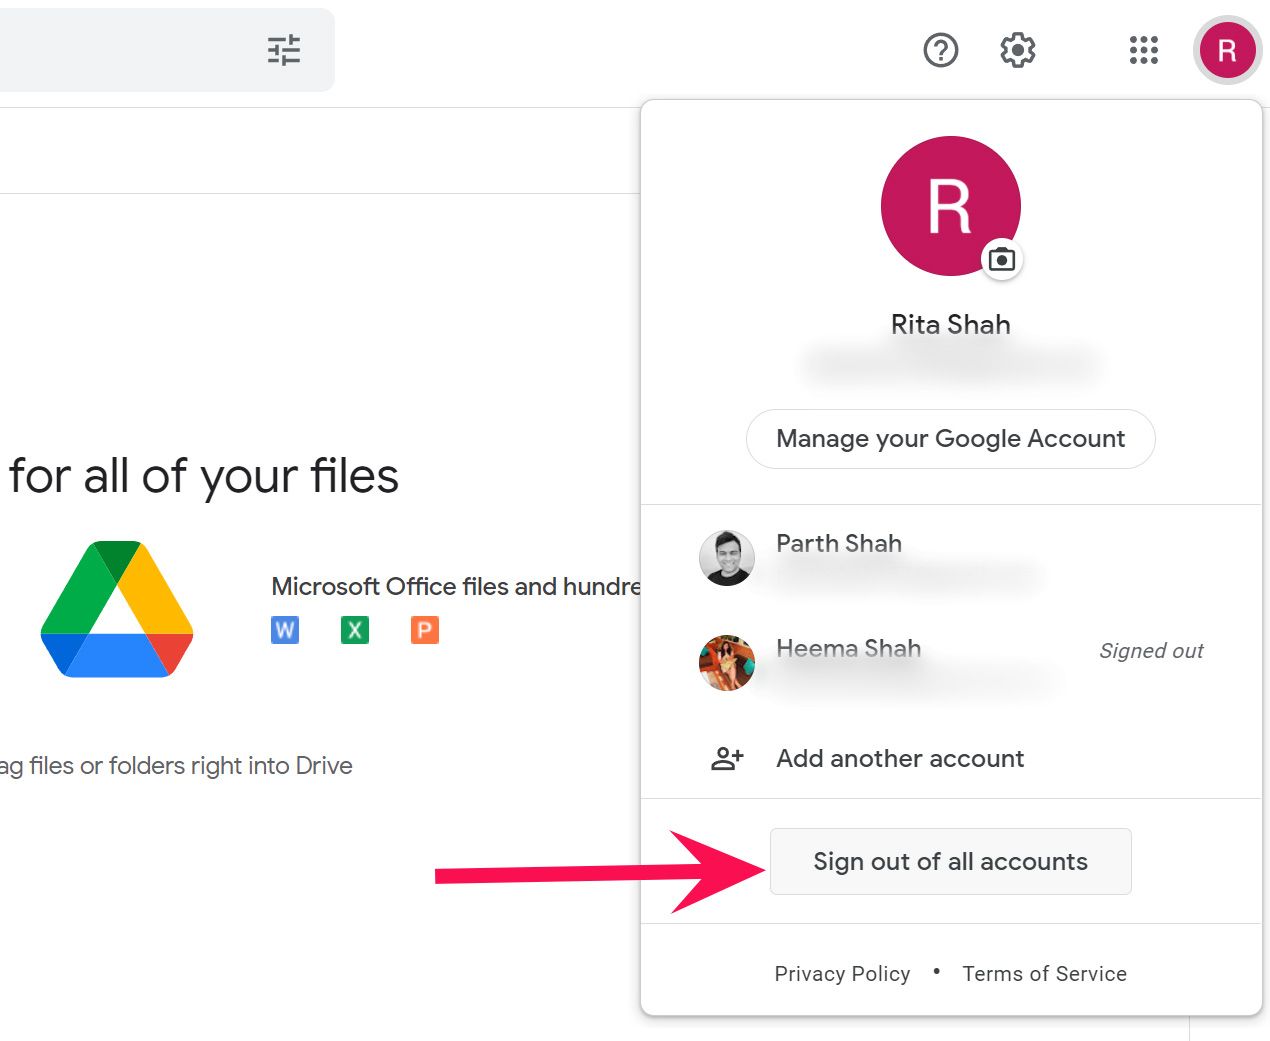 Screenshot of a Google Drive interface with a red arrow indicating the 'Sign out from all Google accounts' option